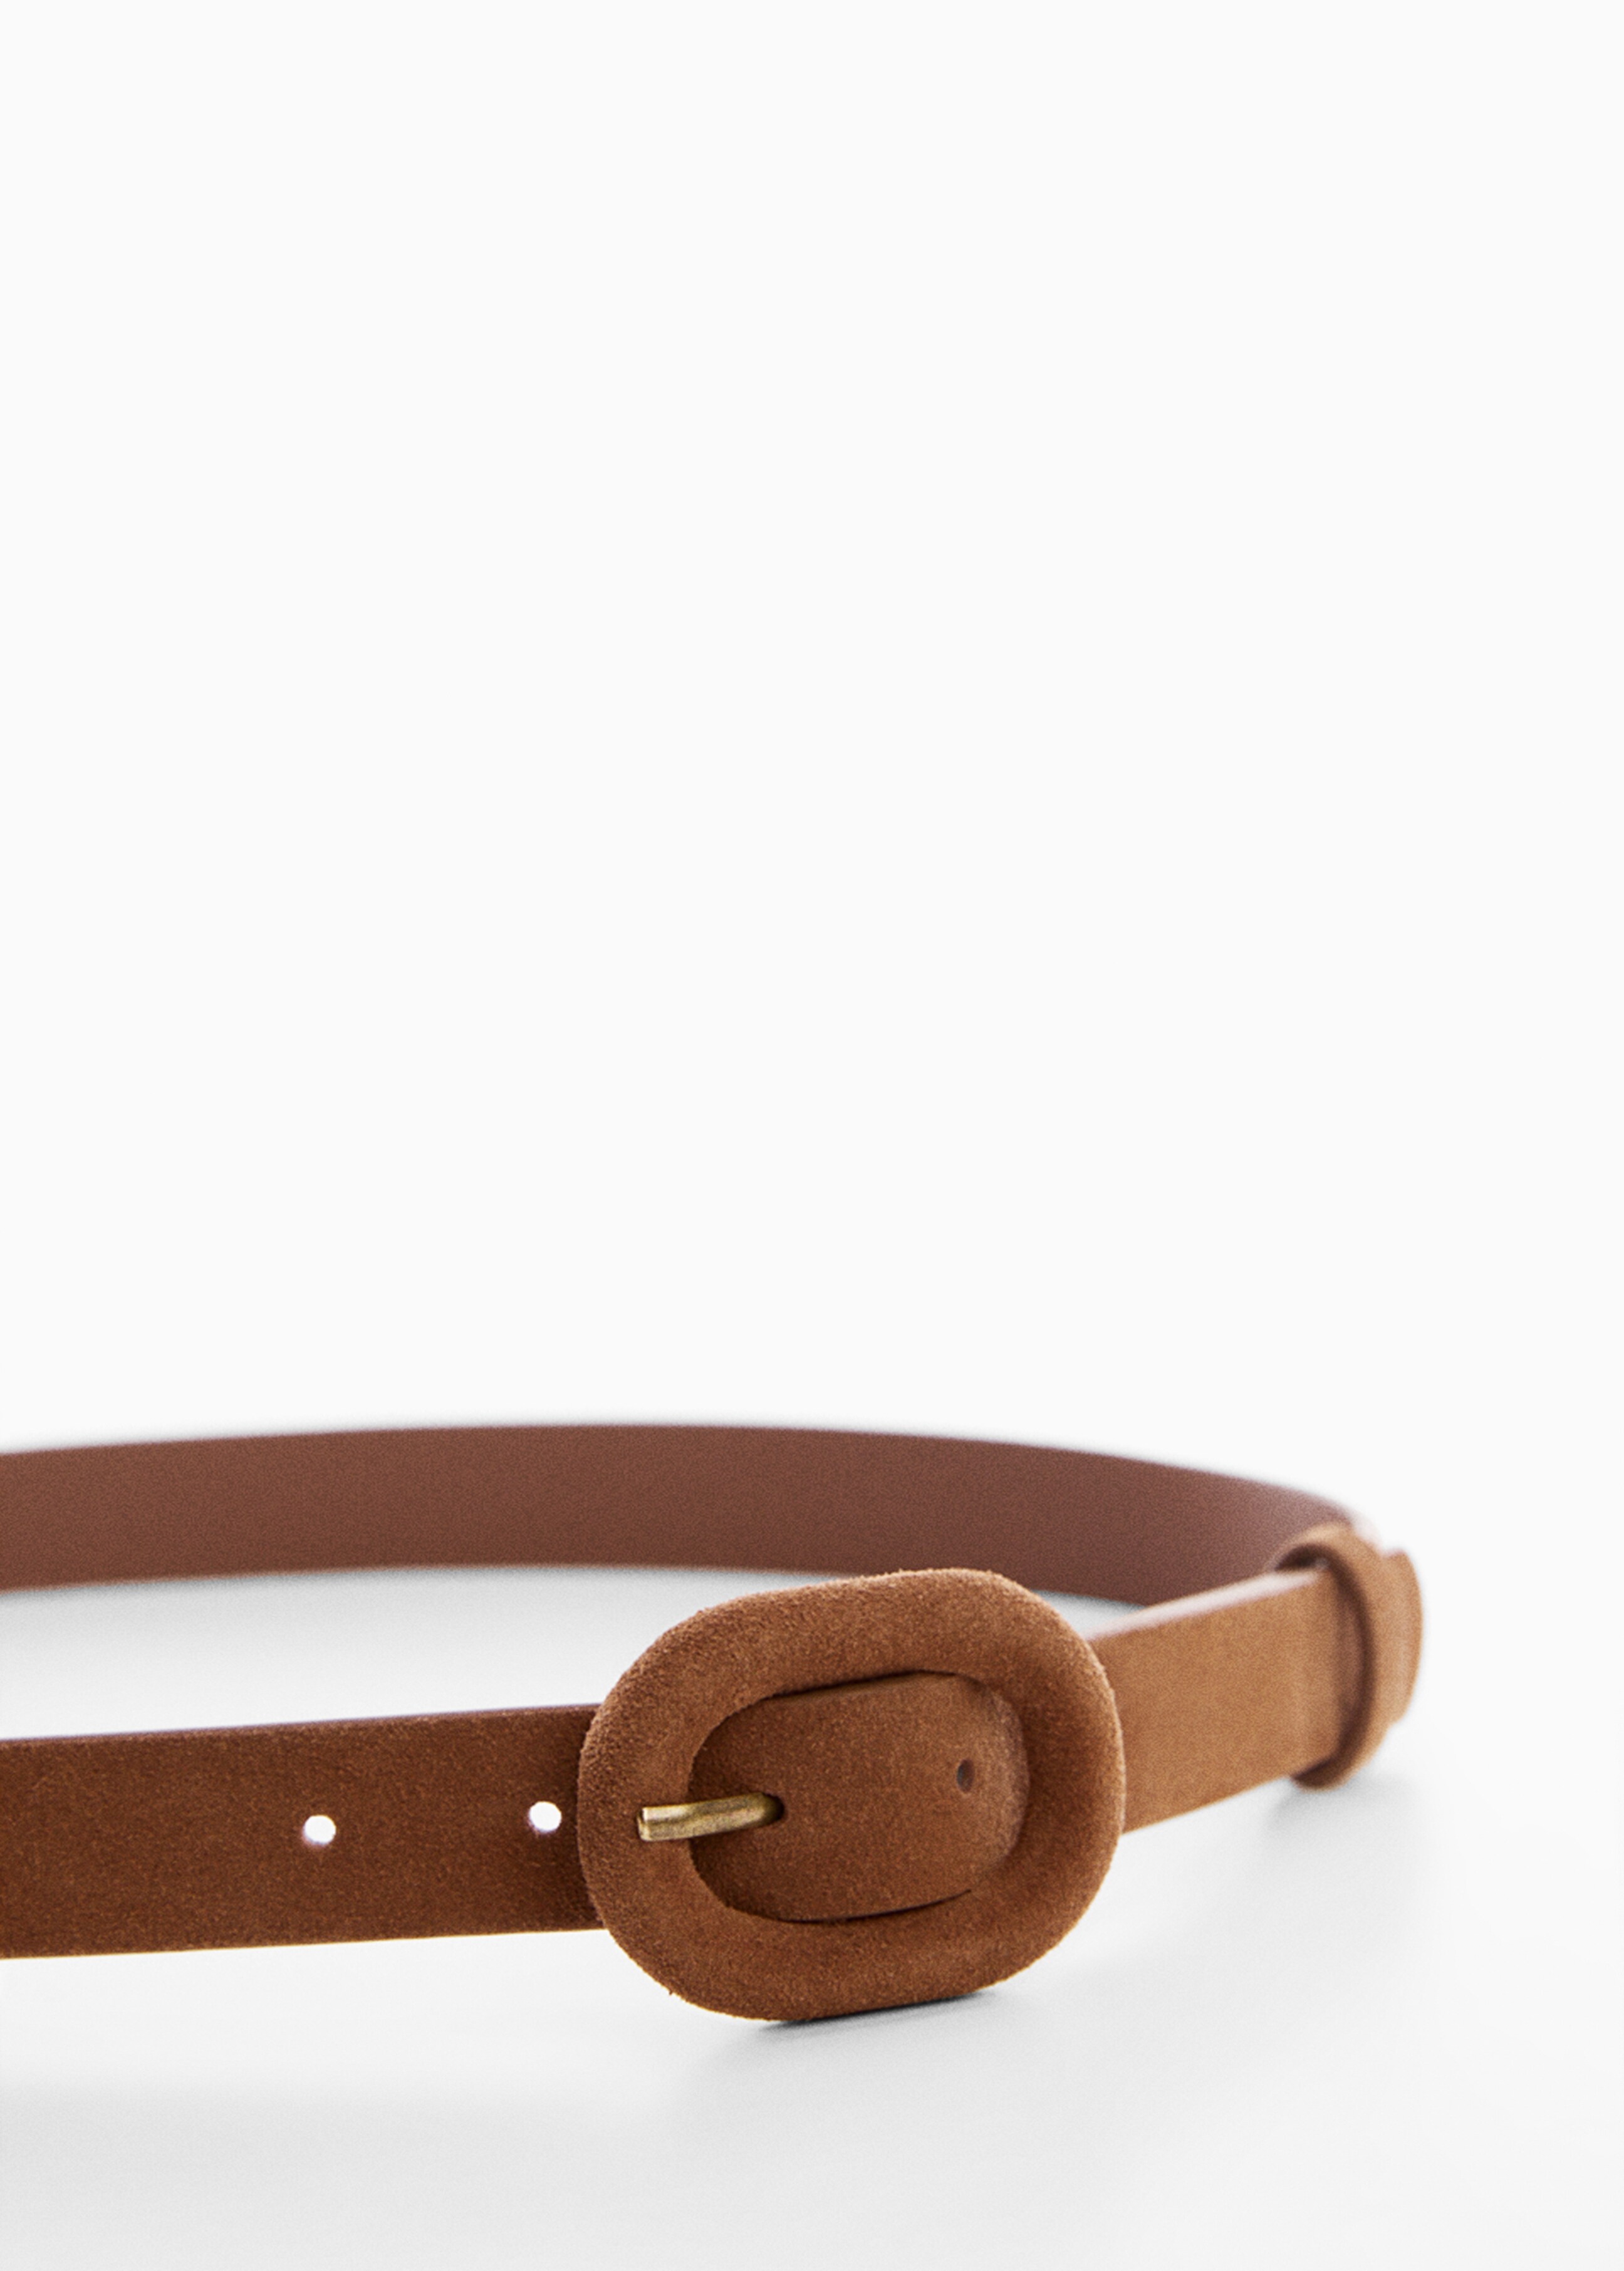 Leather belt with wide buckle - Details of the article 1